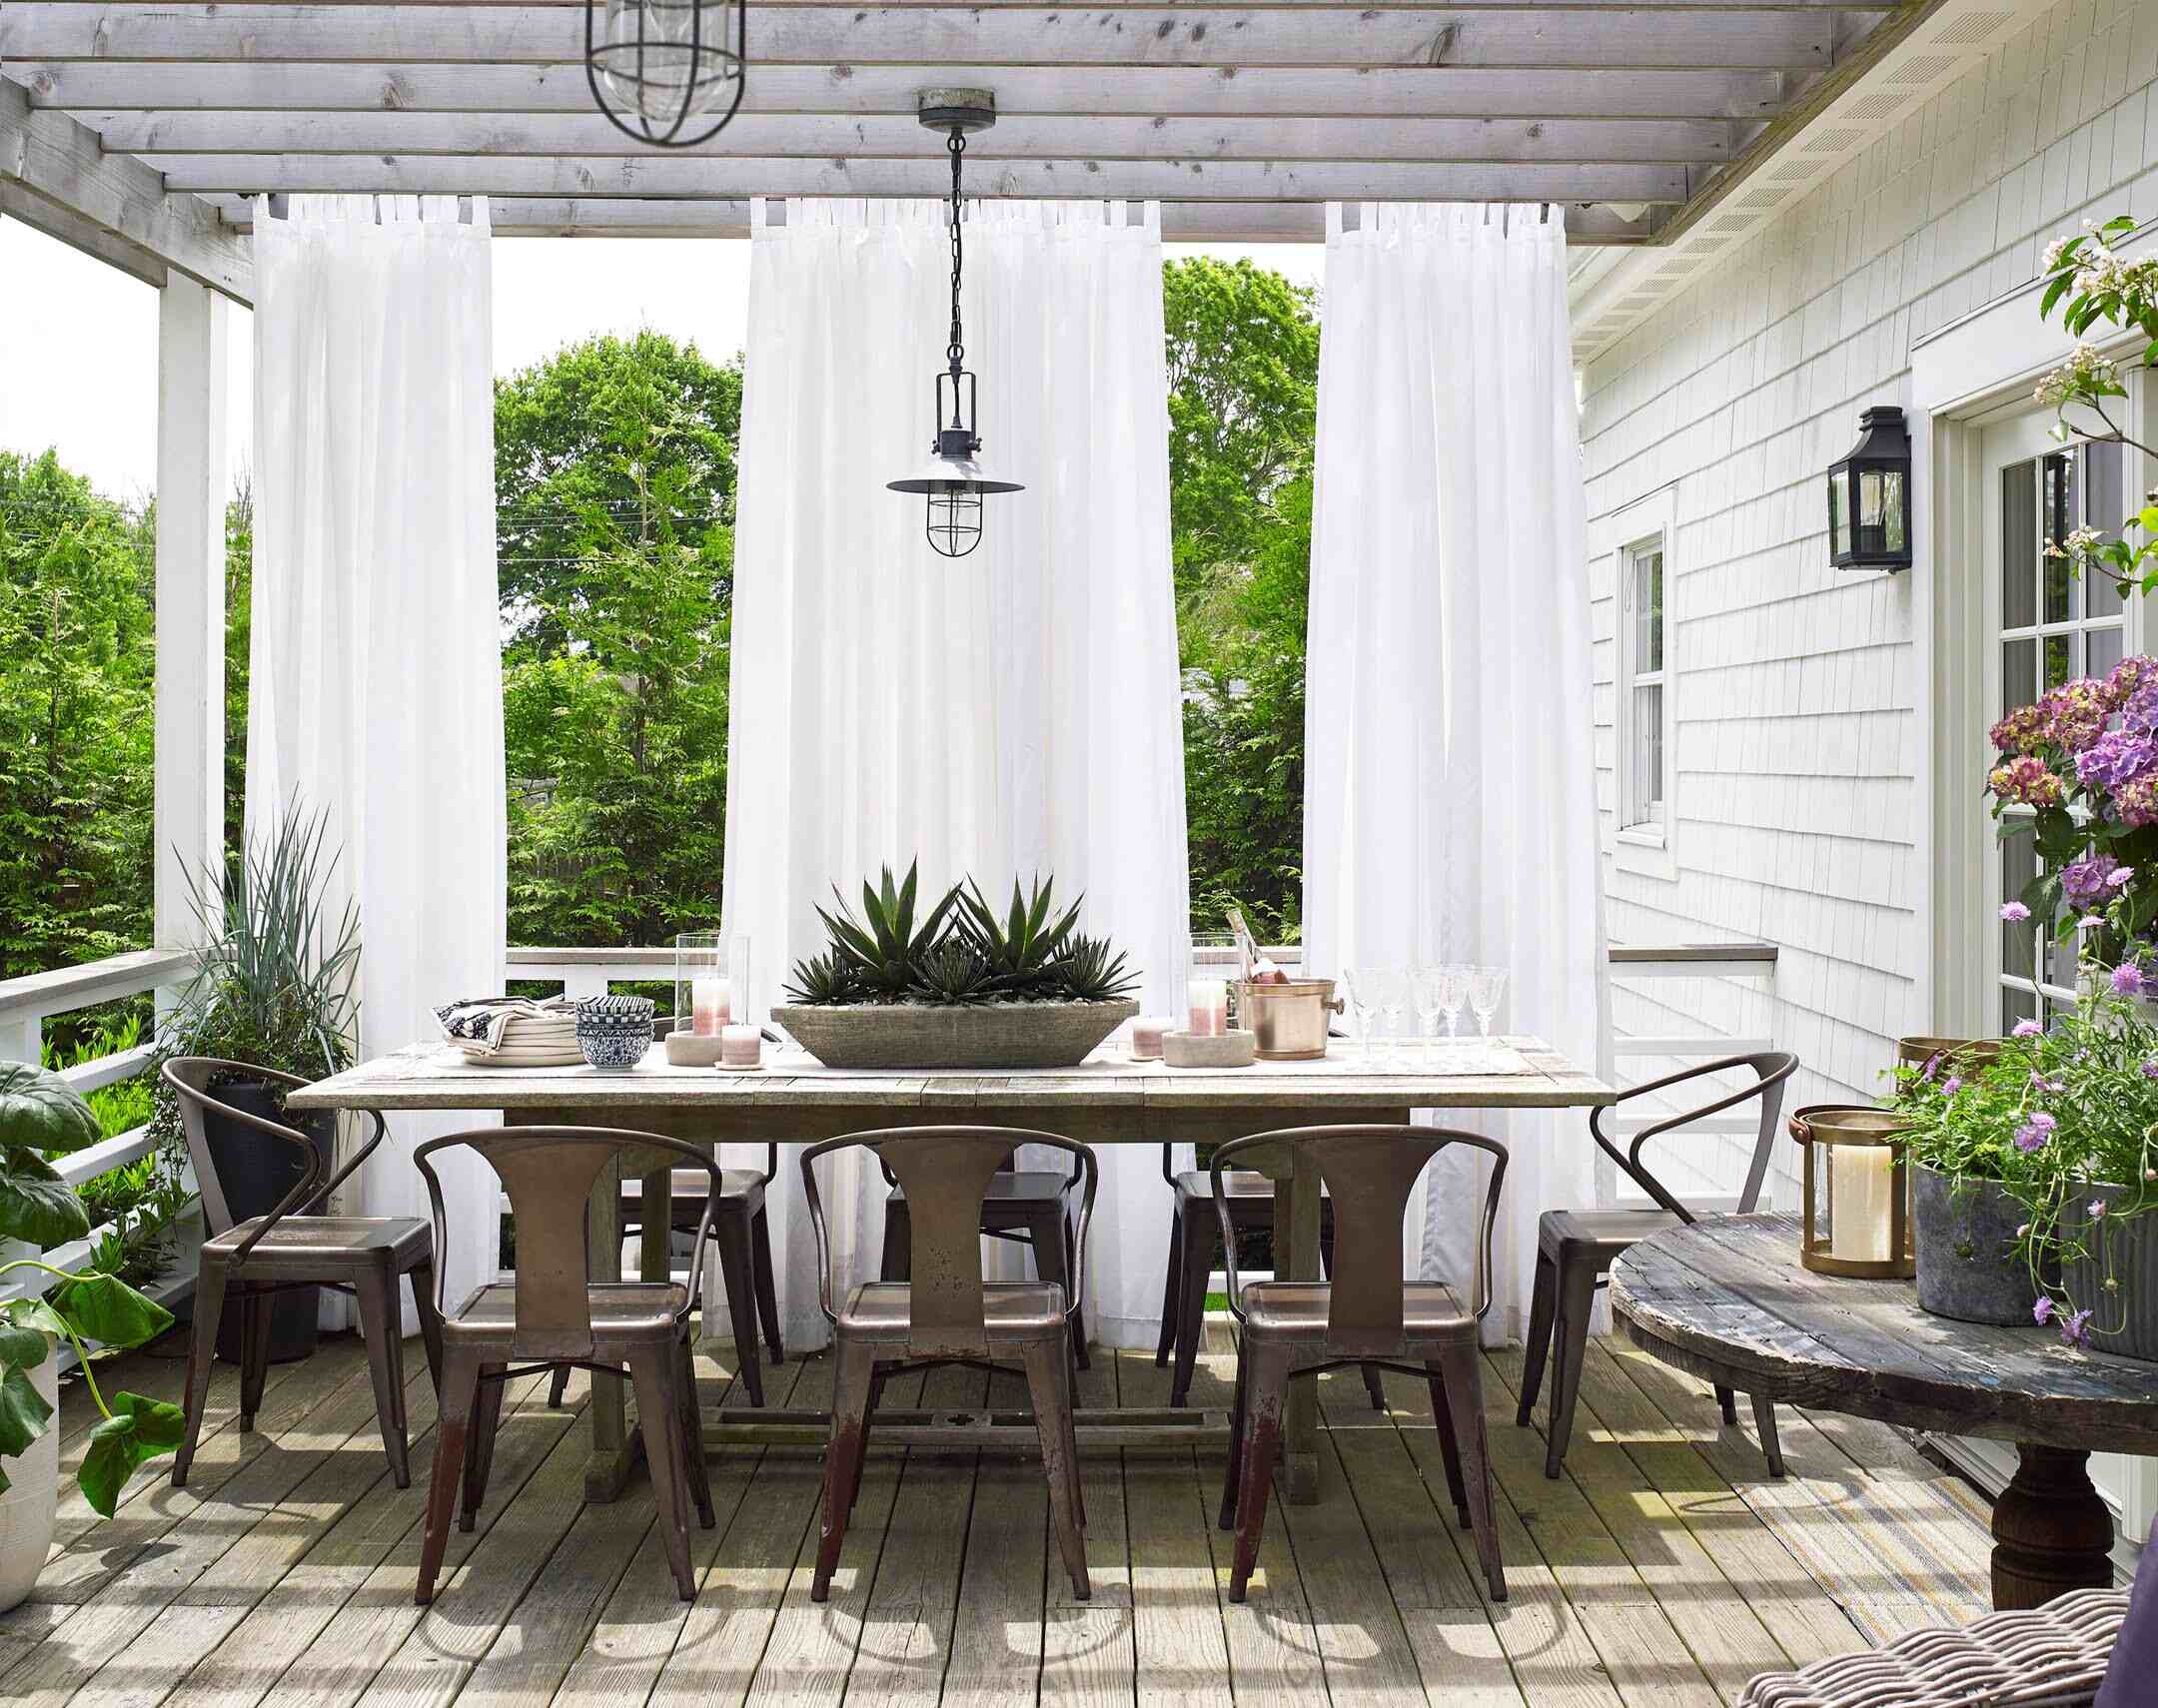 How To Hang Outdoor Curtains On Patio